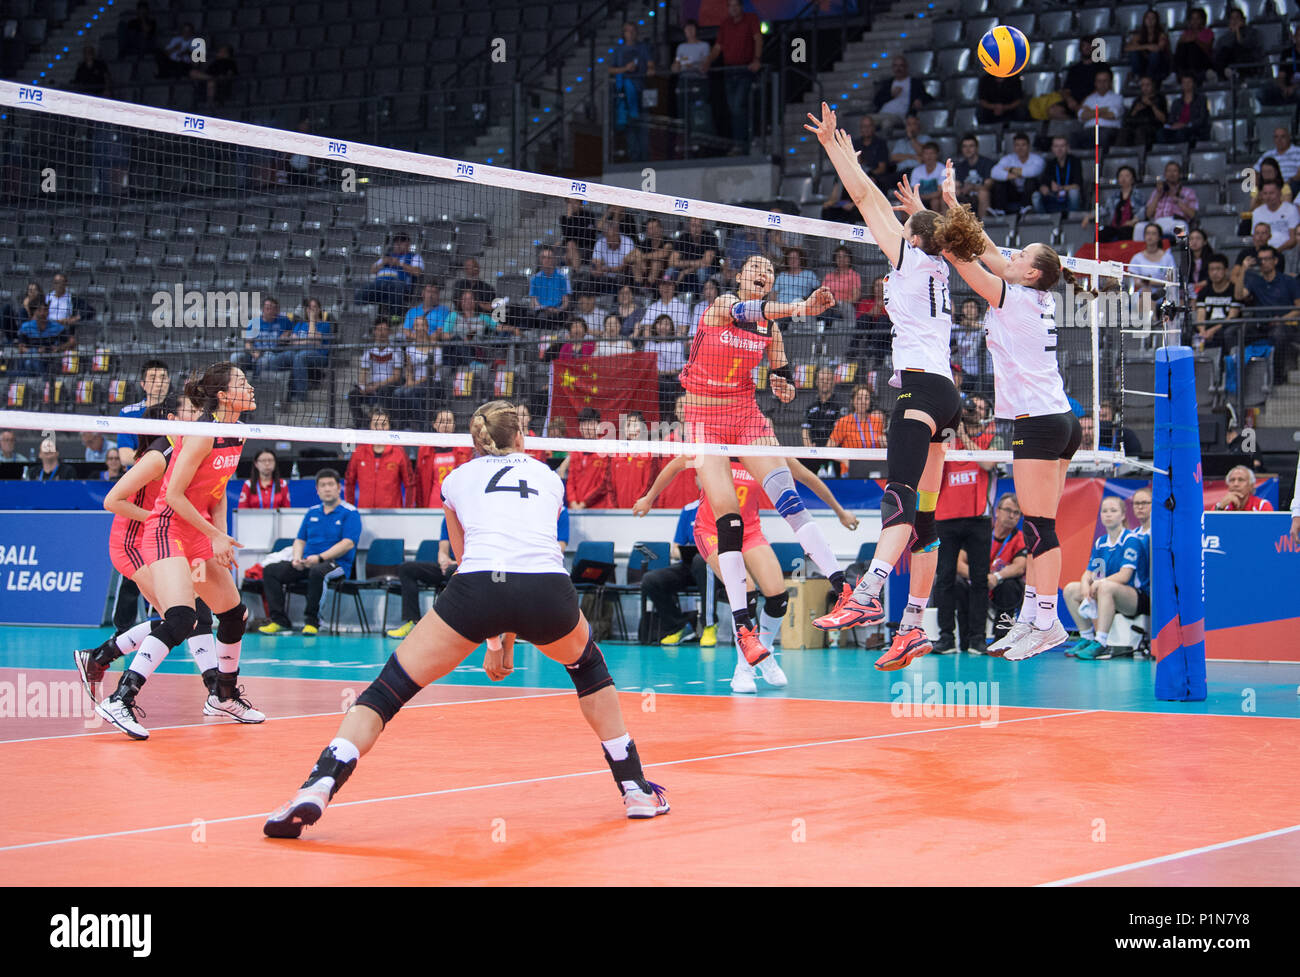 12 June 2018, Germany, Stuttgart: Volleyball, women's Nations League match between Germany and China at the Porsche Arena: China's Xinyue Yuan (3.f.r) smashes the ball. Germany's Marie Schoelzel (2.f.r) and Denise Hanke (r) jump to block. Photo: Sebastian Gollnow/dpa Stock Photo